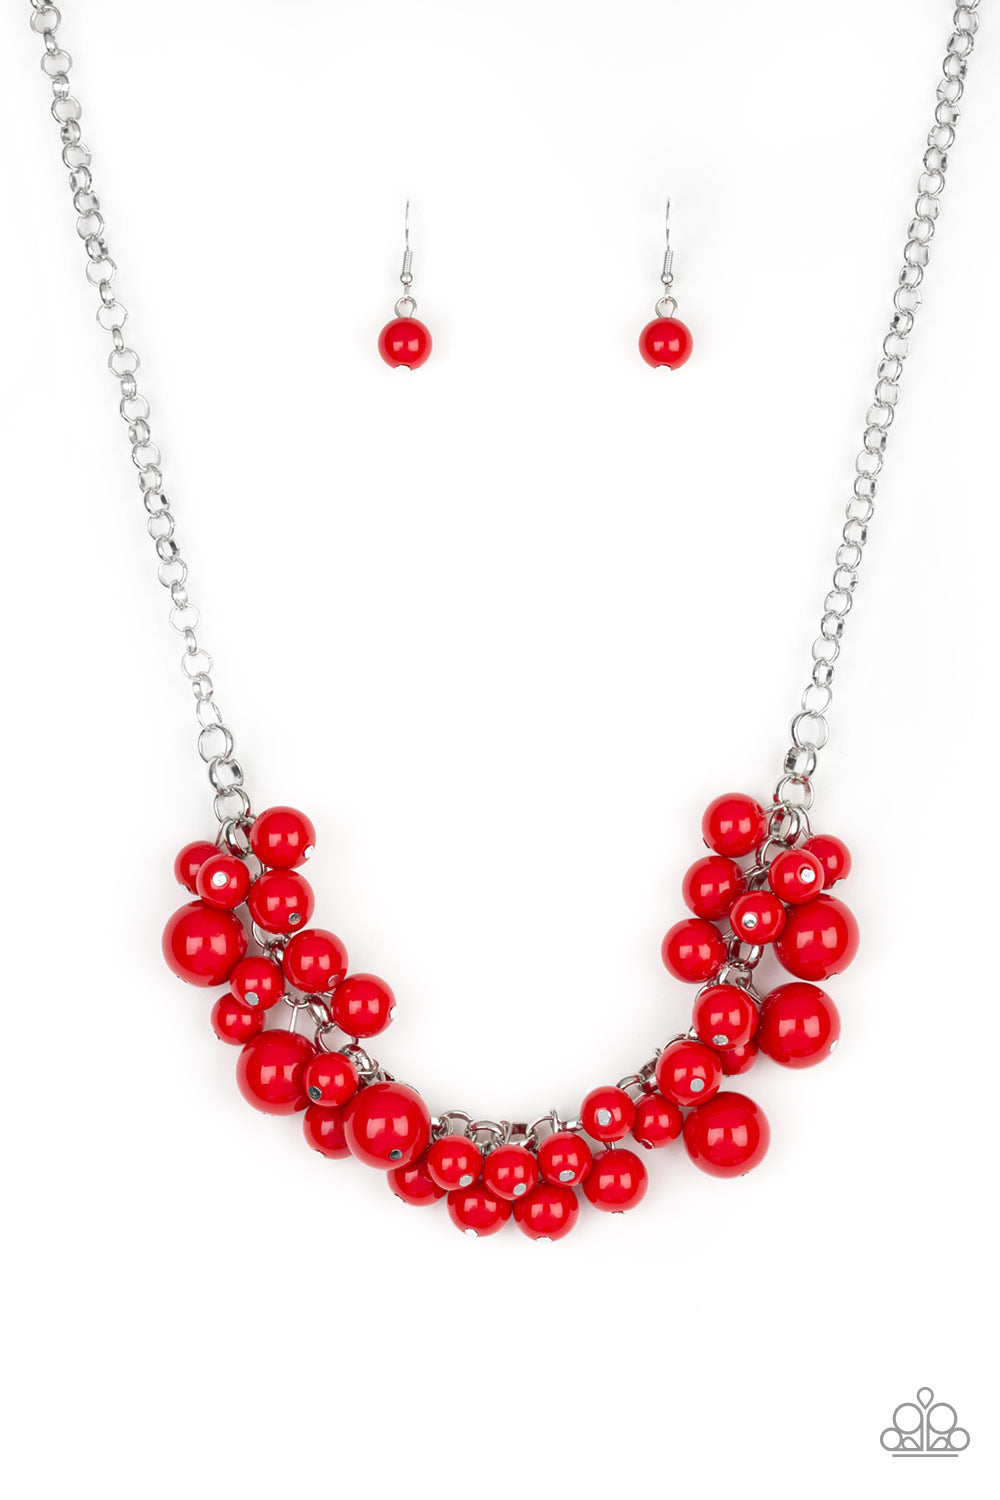 Paparazzi Necklaces - Walk This Broadway - Red